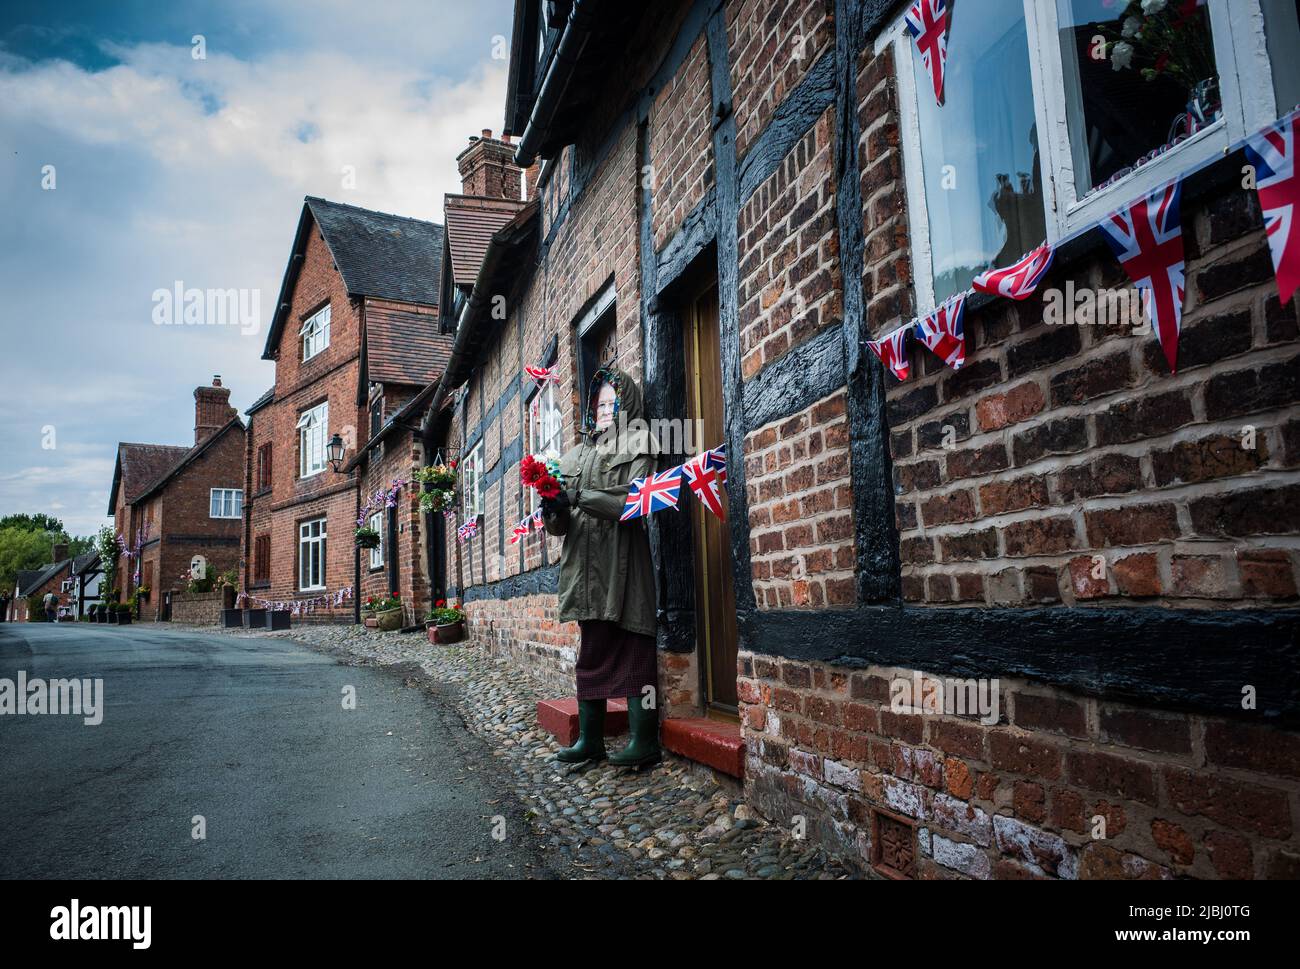 A queen decoration along the village of Great Budworth, Chershire during the platinum jubilee. Stock Photo